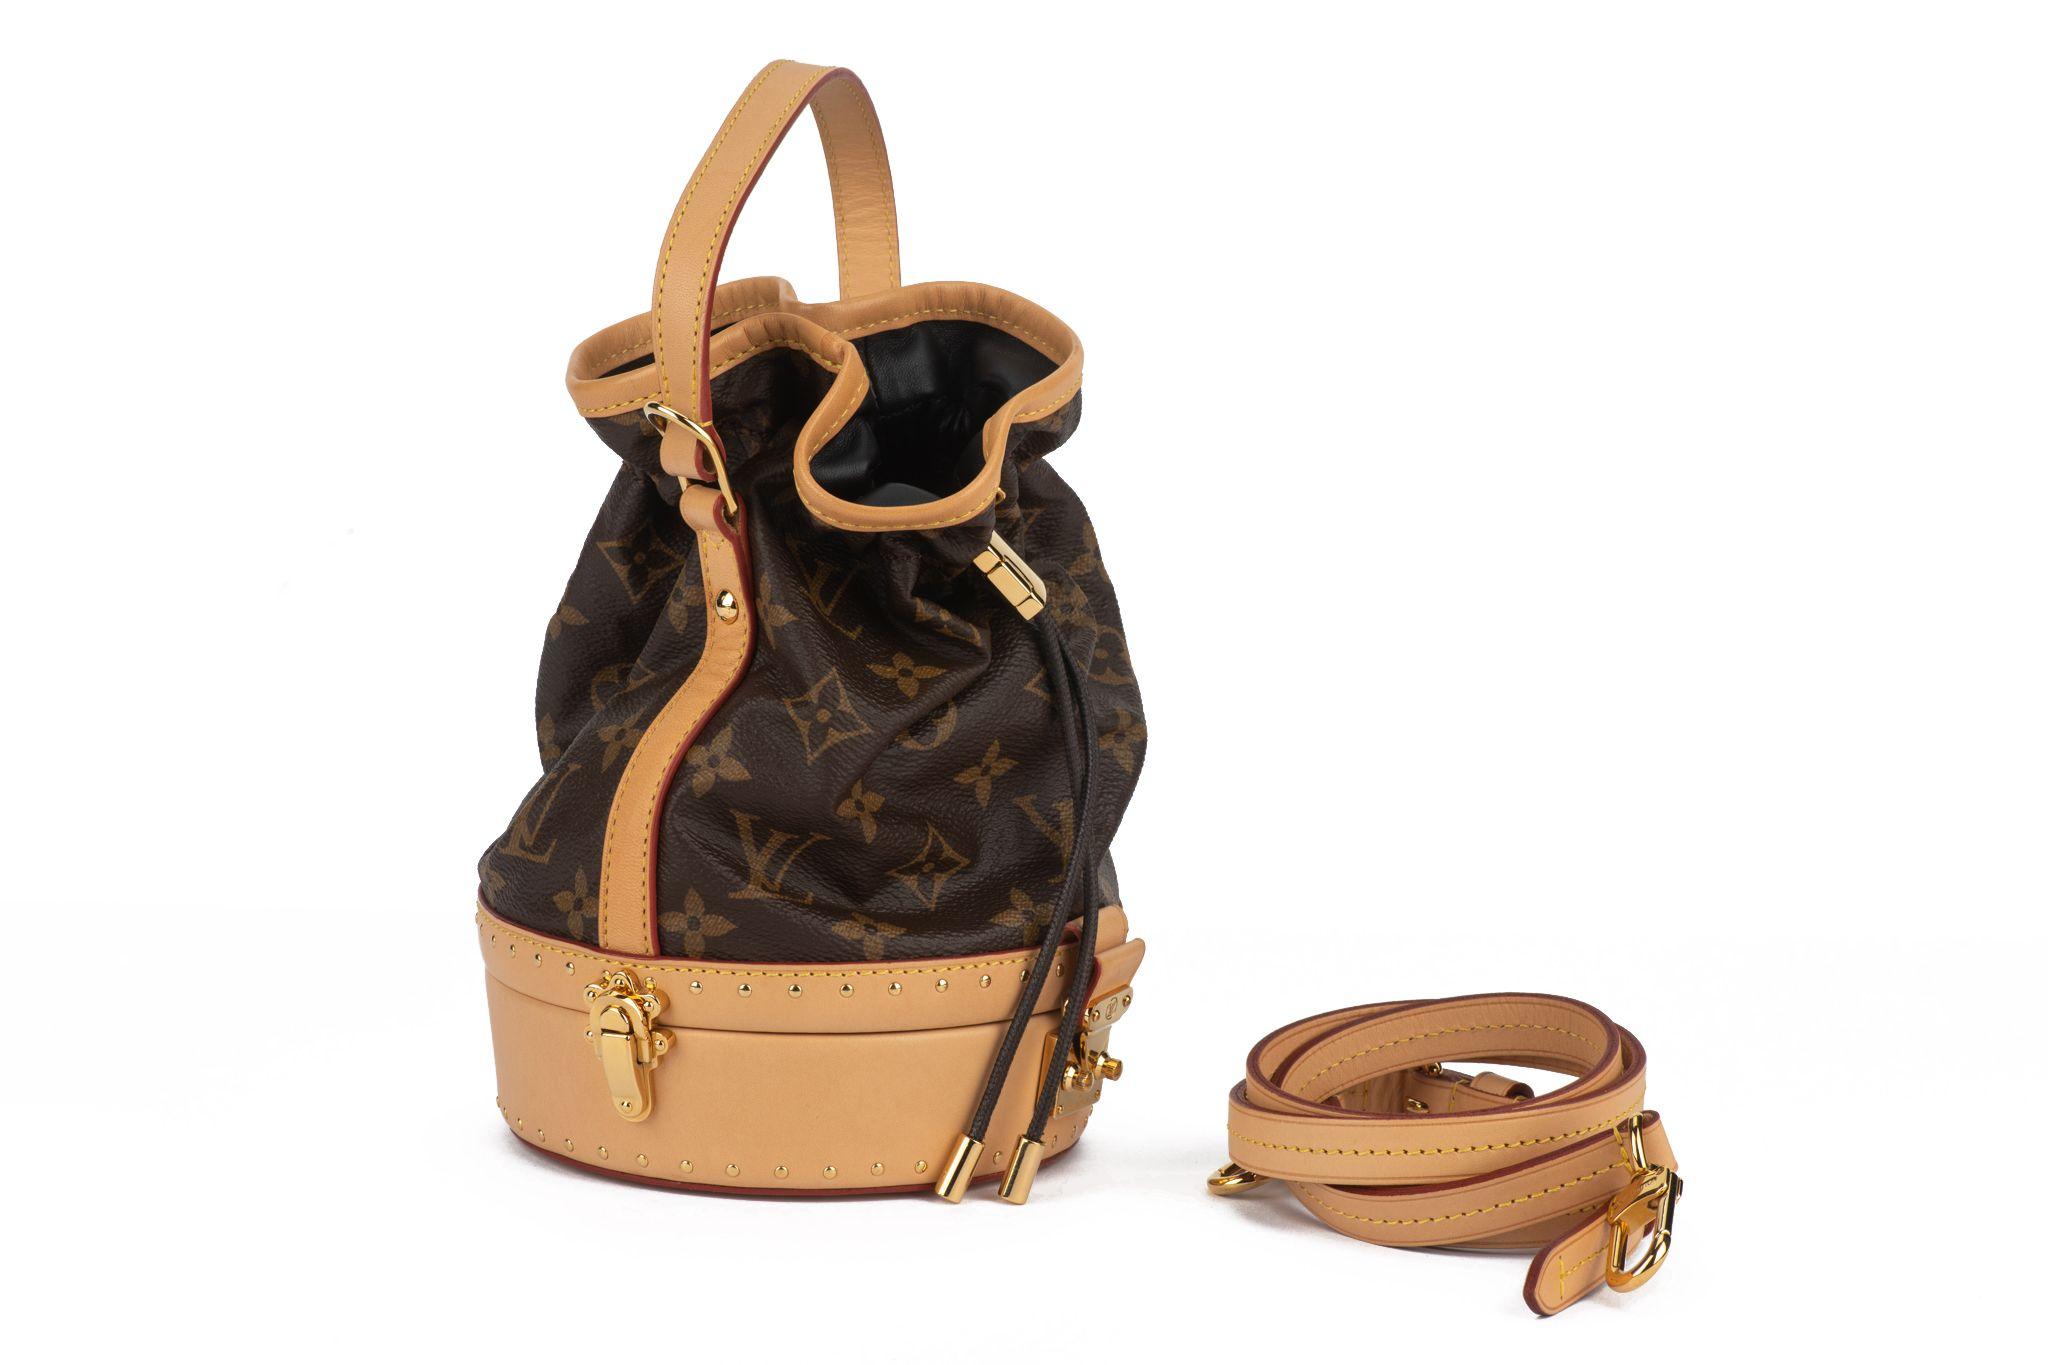 The Louis Vuitton Monogram Petit Noe Trunk handbag is crafted of monogram coated canvas with a calfskin leather trim. Features brass hardware, single flat top handle drop 4.5